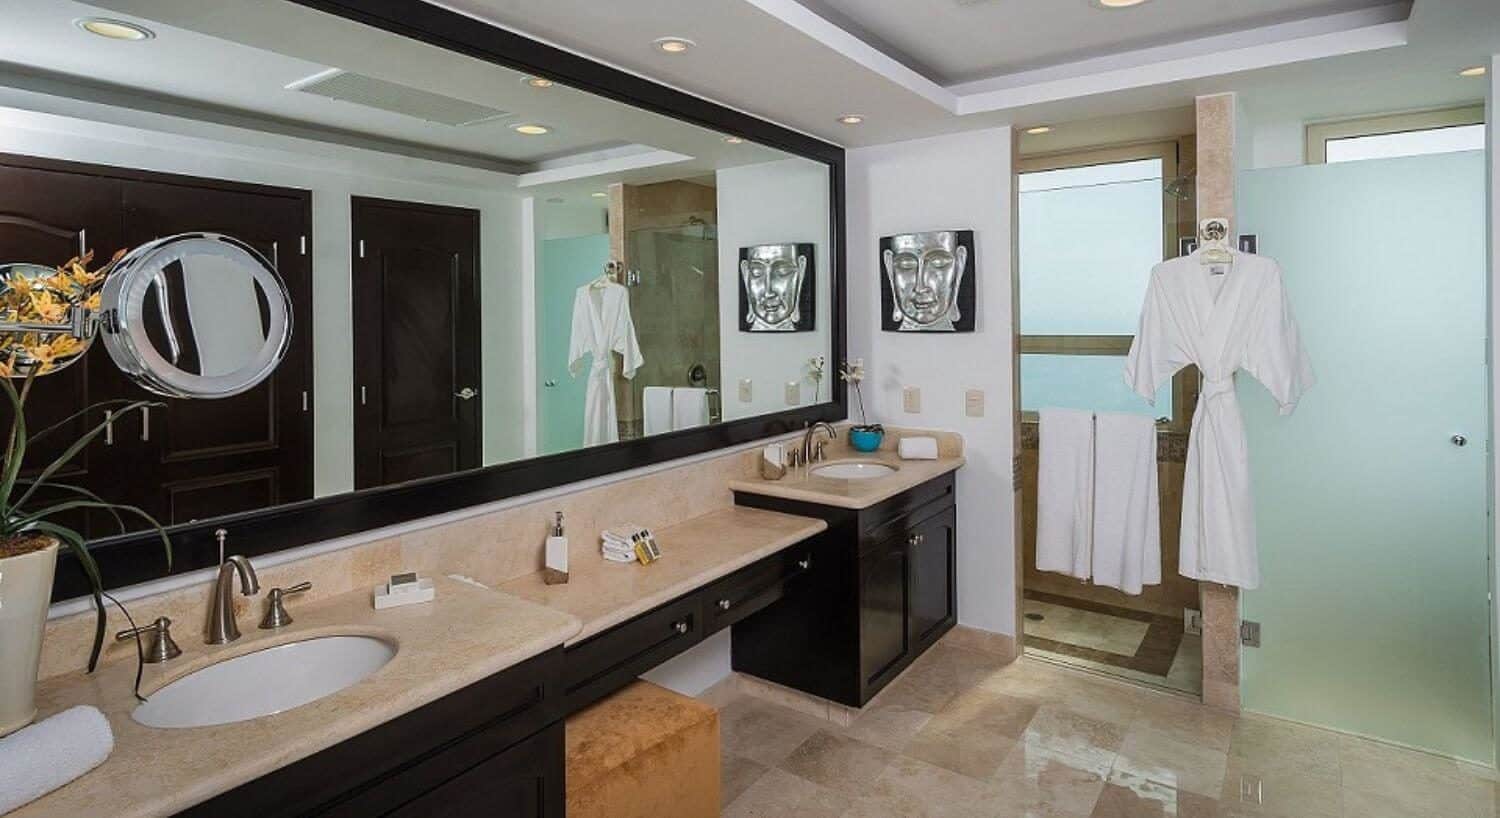 A bathroom with granite countertop with double sinks and a vanity in between them, a full length mirror over the counter, and a walk in shower with a white robe hanging next to the shower.